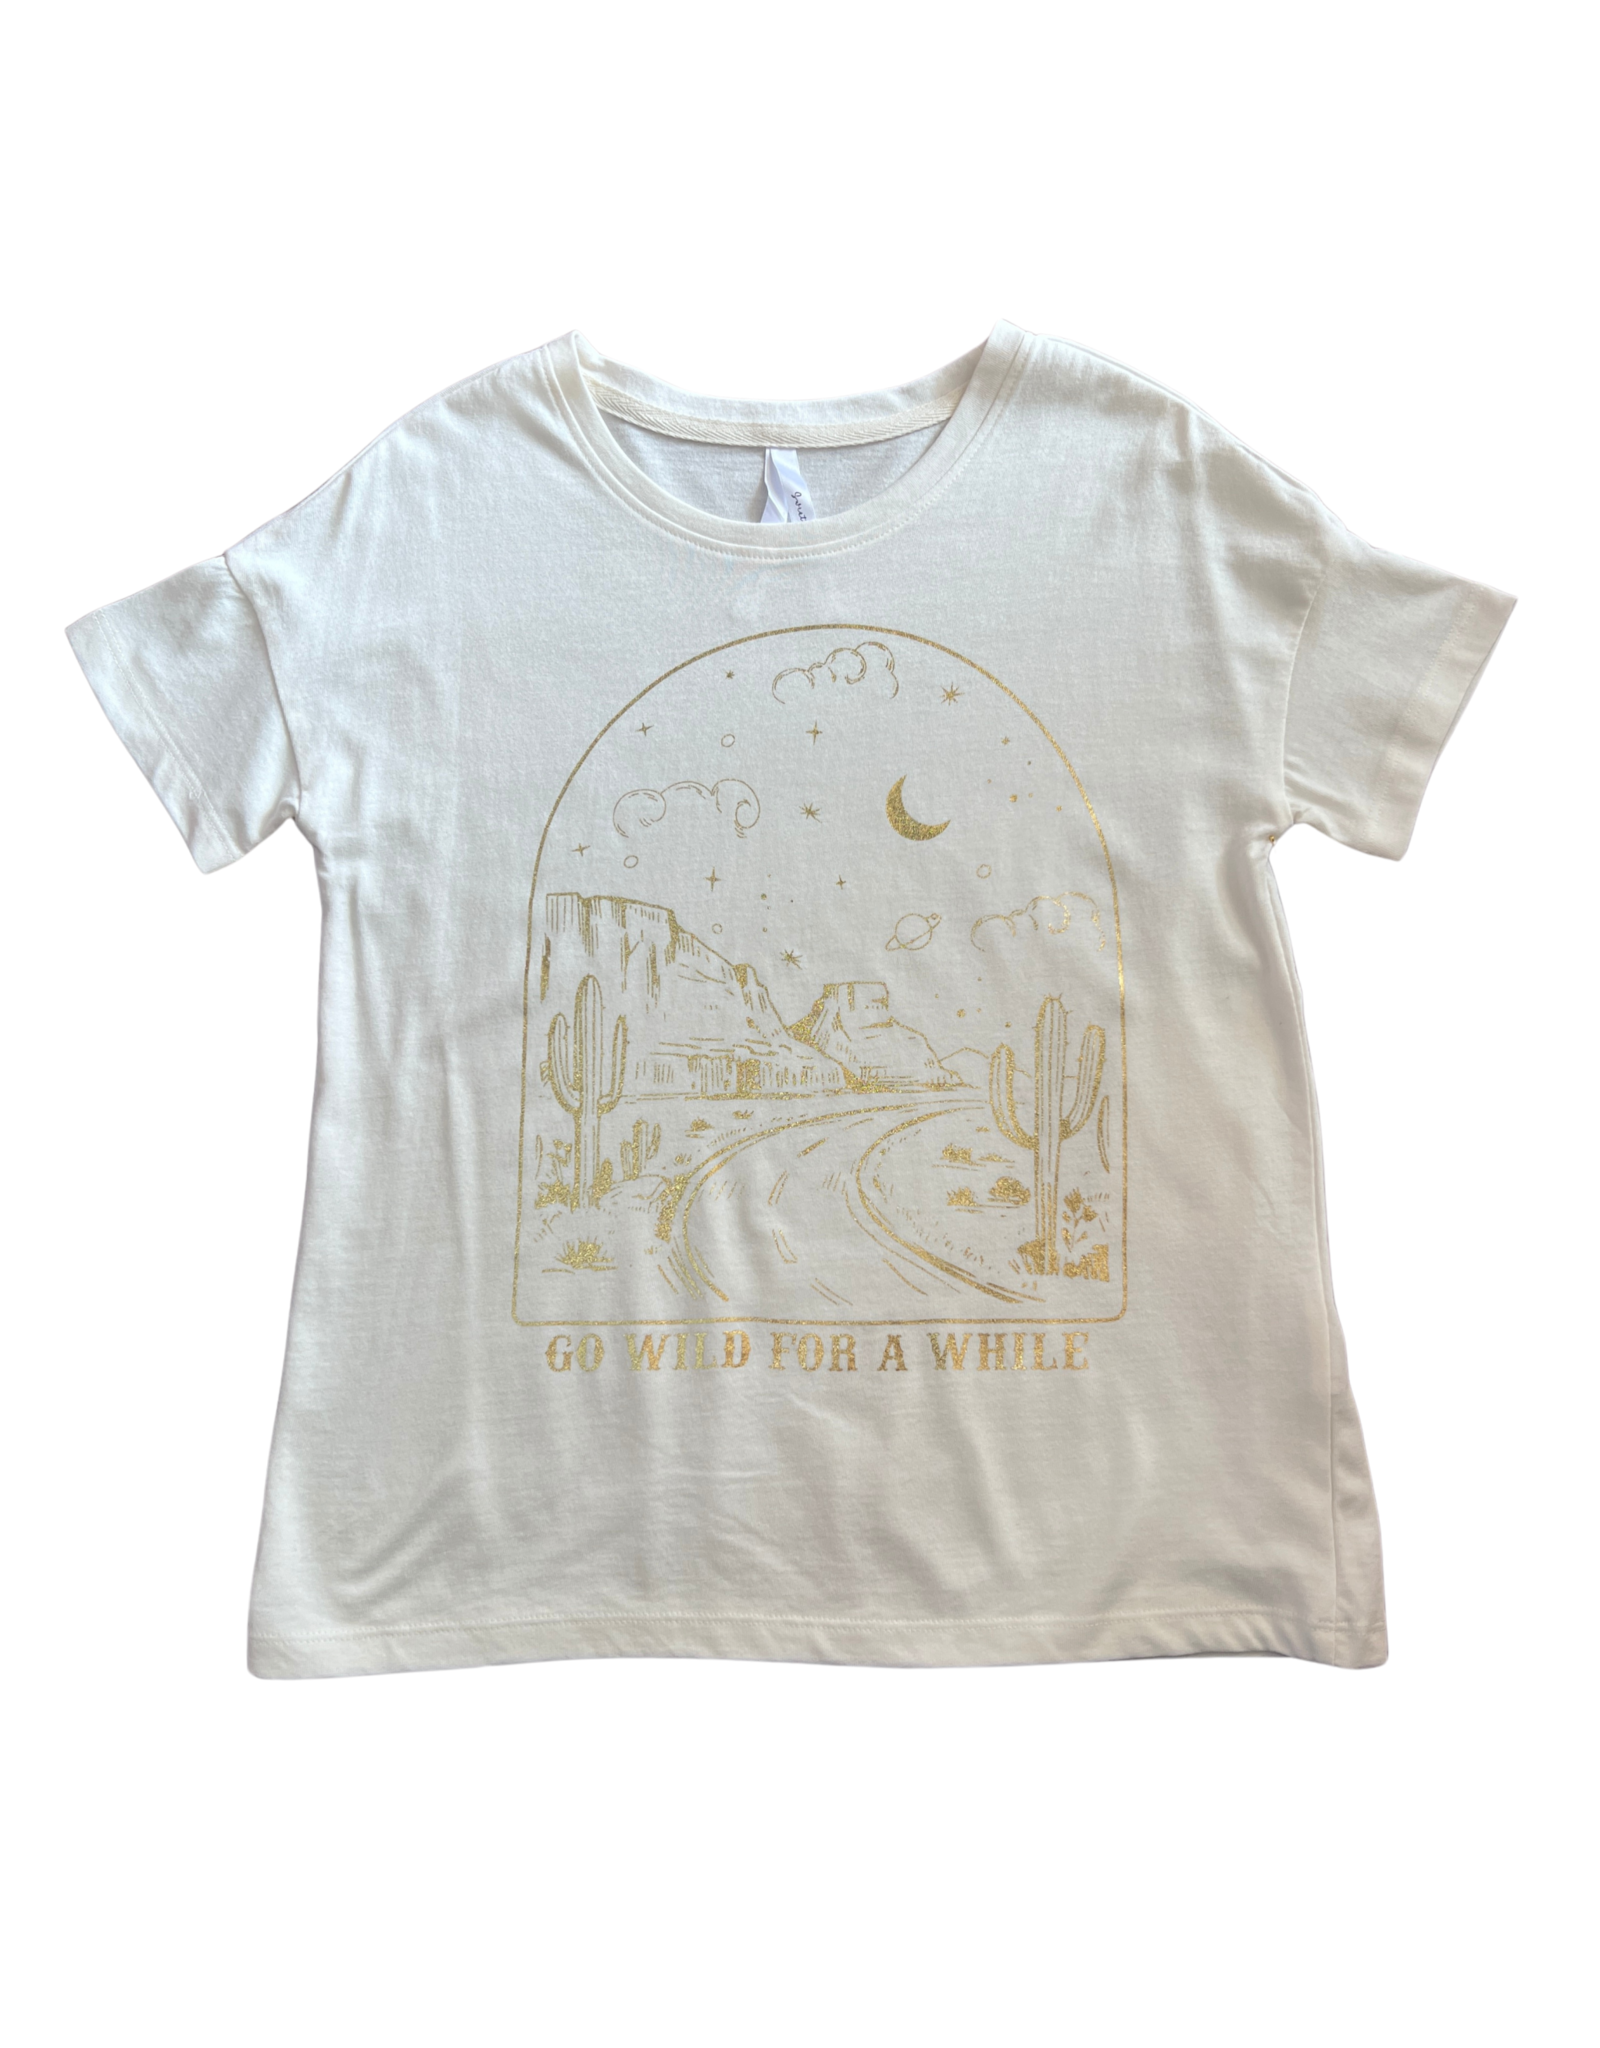 Sweet Soul- Go Wild For A While Gold Foil Tee